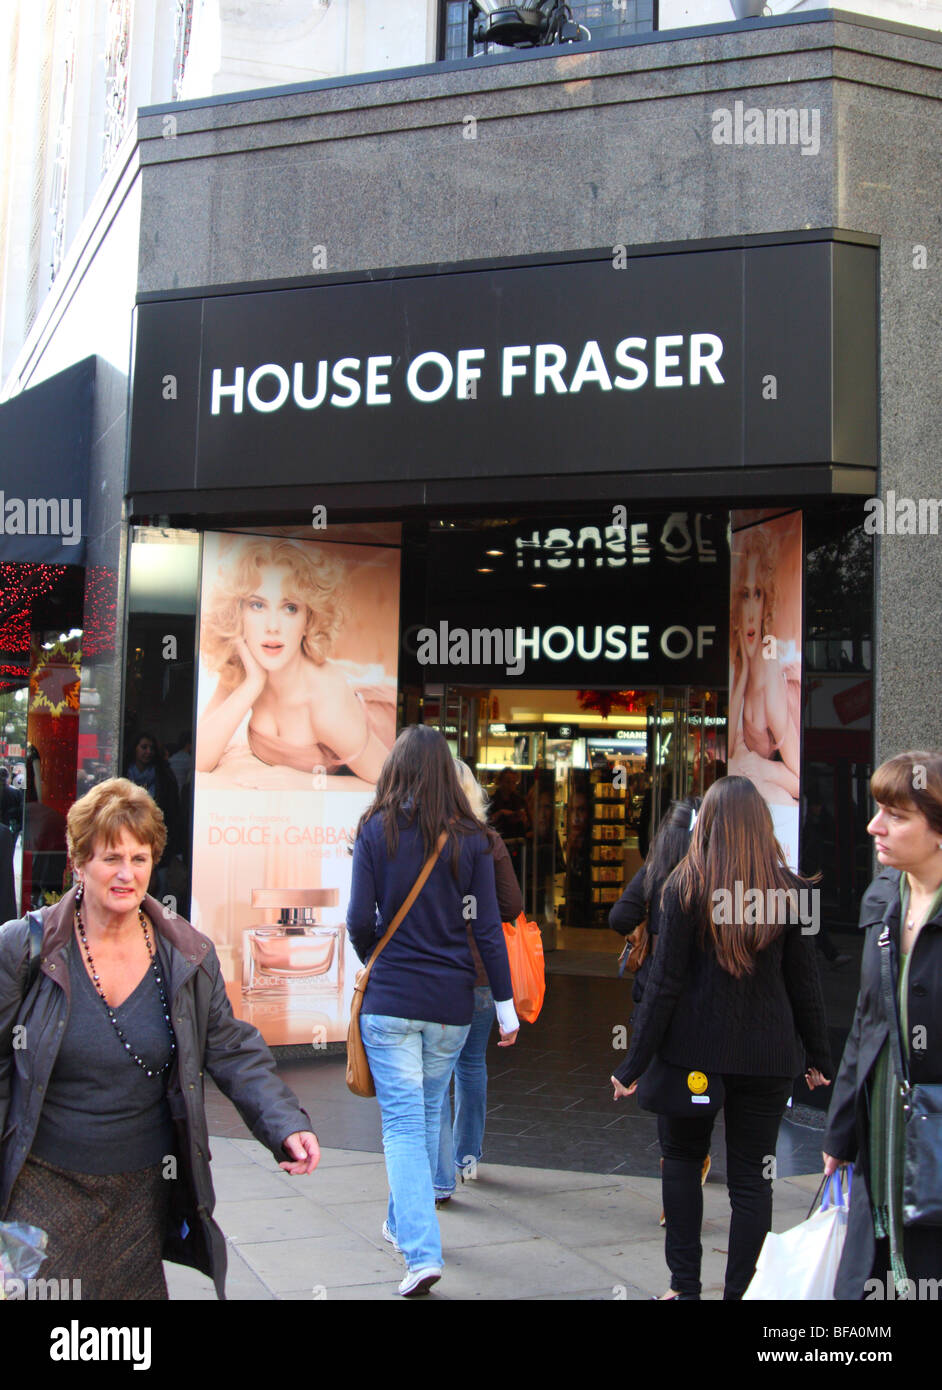 House of Fraser department store, Oxford Street, Londres, Angleterre, Royaume-Uni Banque D'Images